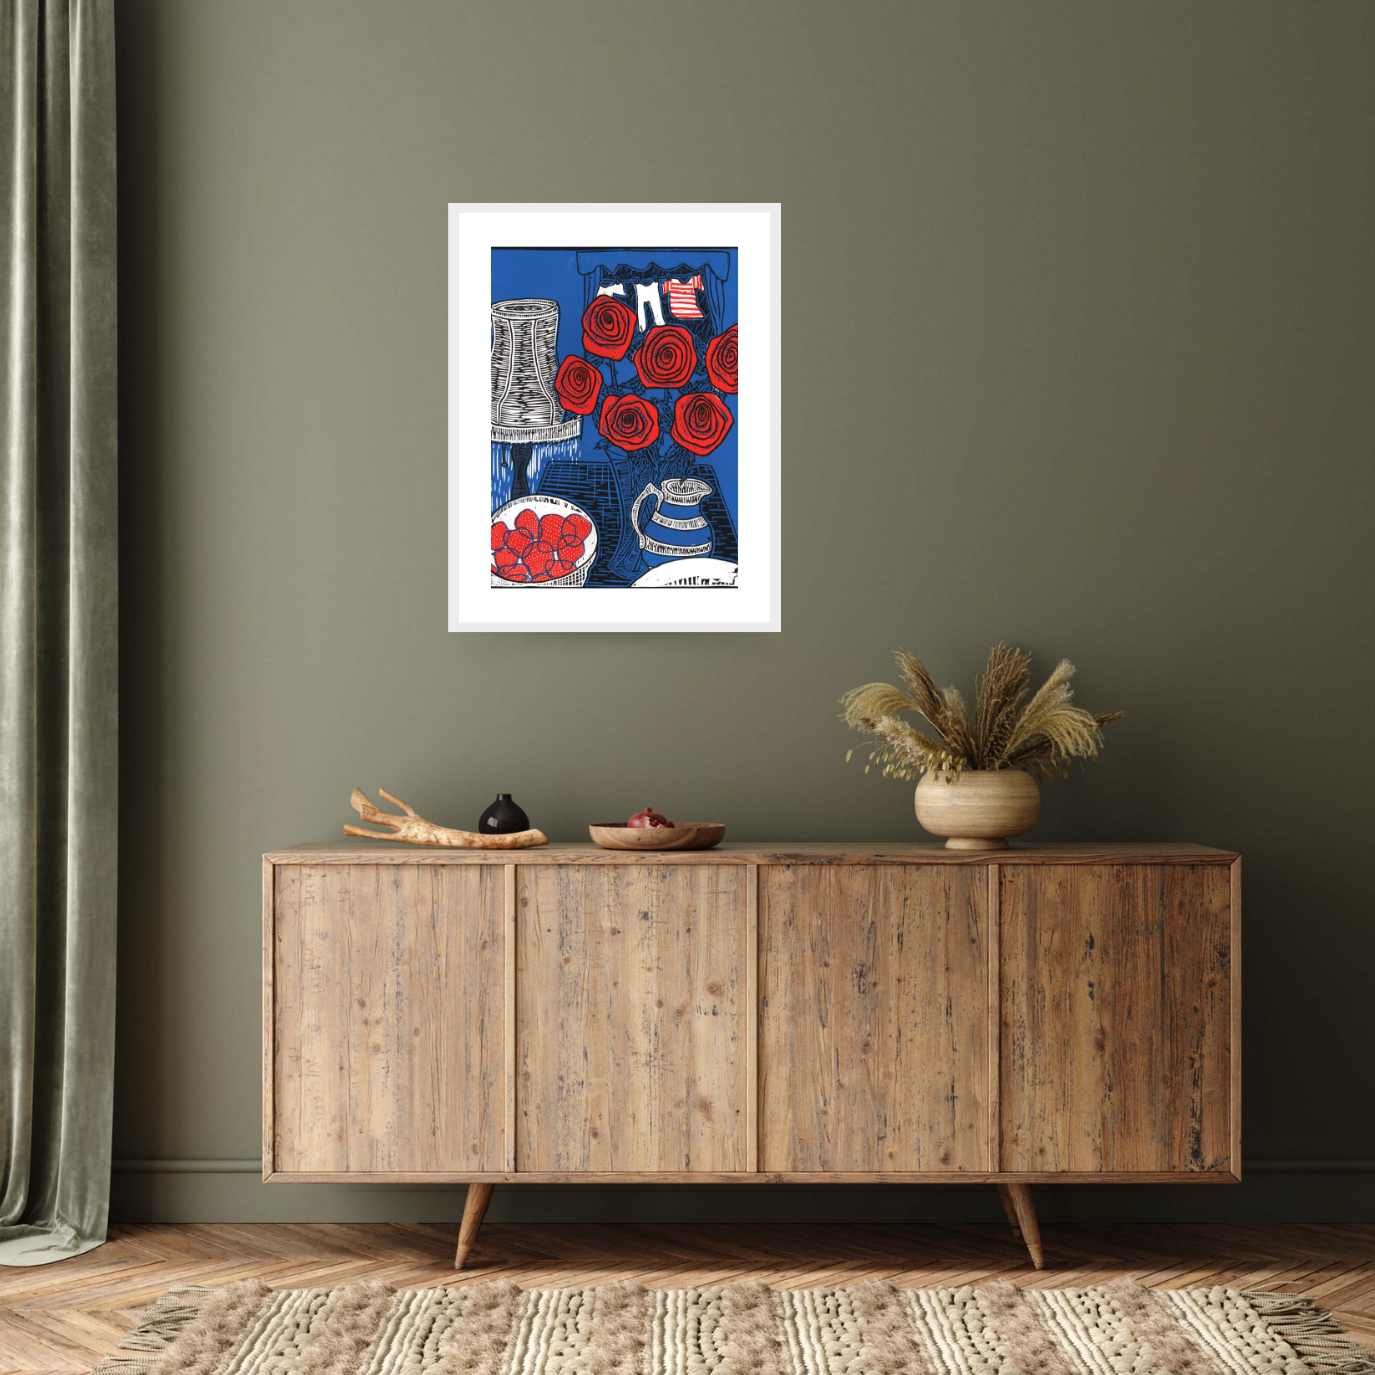 Discover the captivating 'Still life with Roses, 2014' by Faisal Khouja: a white framed fine art print featuring a linocut-style painting. With vibrant hues of intense blue, reds, and whites, this artwork showcases Faisal's intricate yet vibrant style, depicting a vase of roses, a lamp, and a bowl of strawberries.